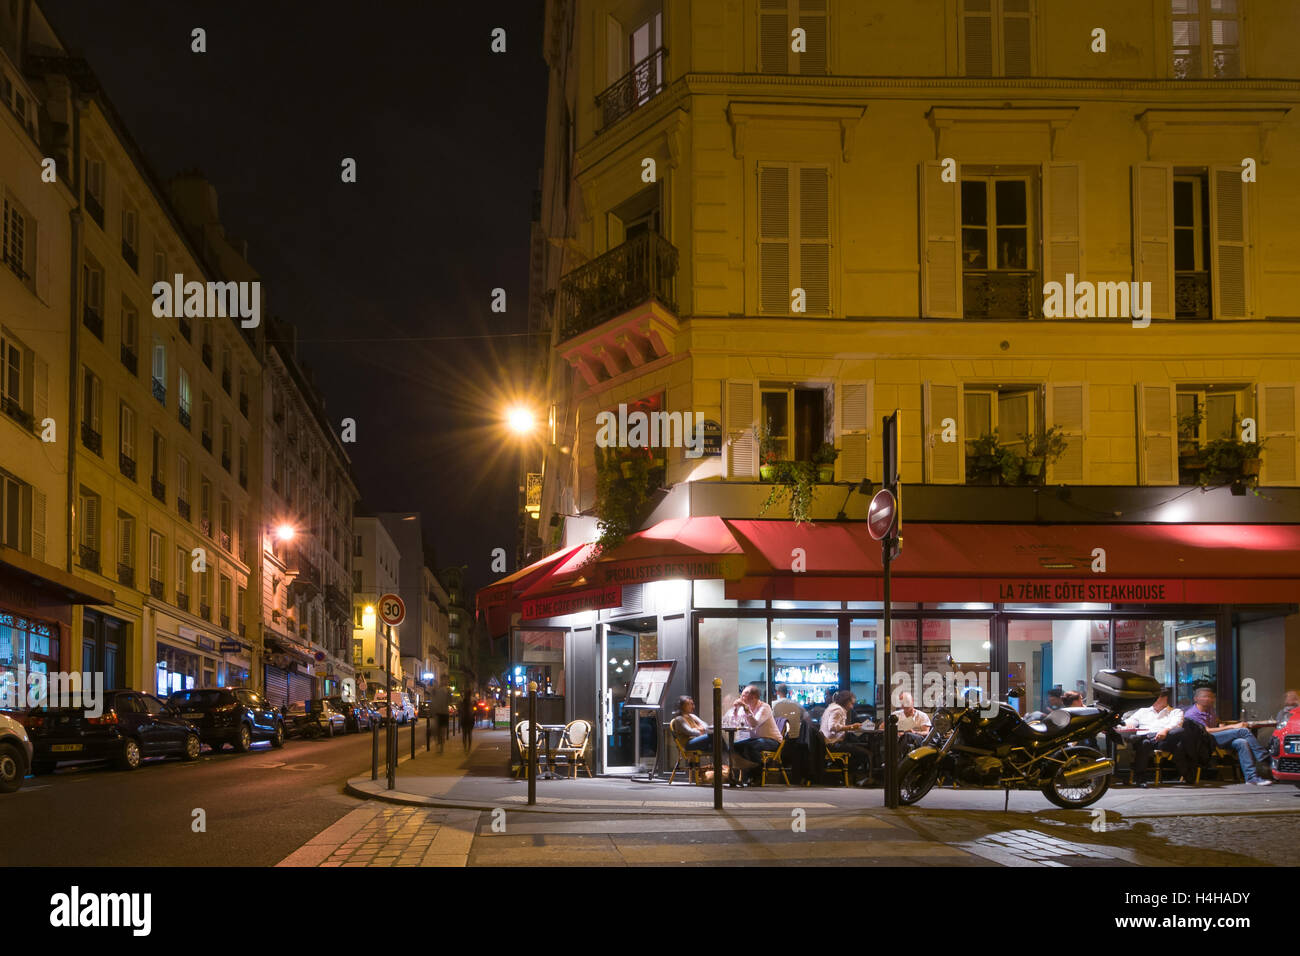 PARIS - SEPT 17, 2014: Paris by night. The people sit and talk in a cafe. Paris, France. Stock Photo